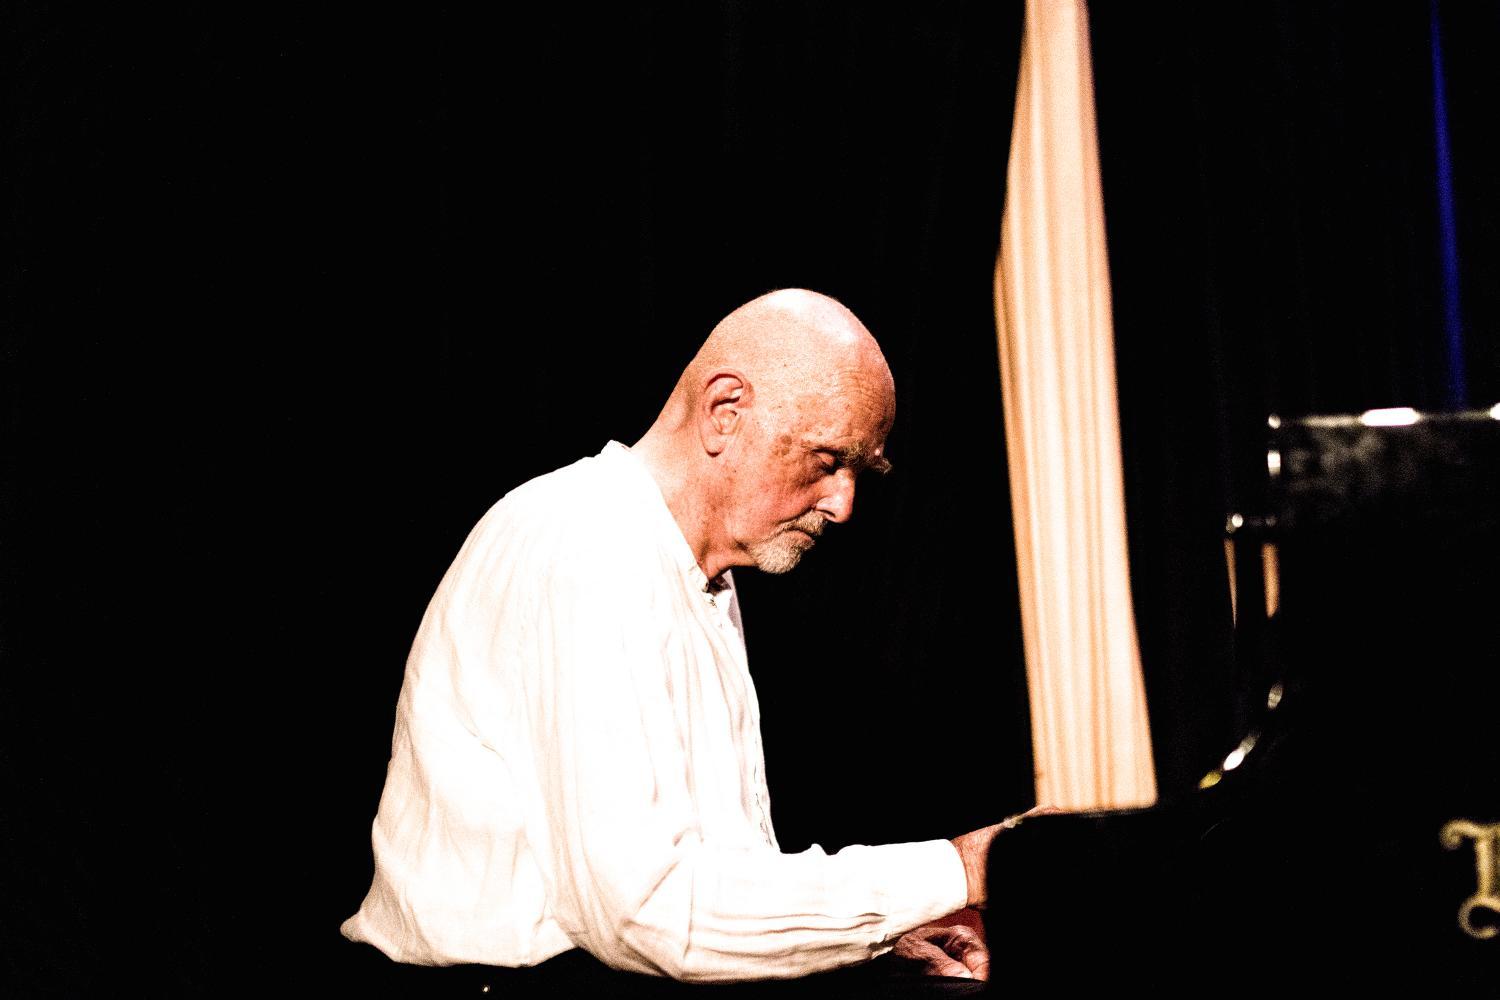 Roedelius at the piano